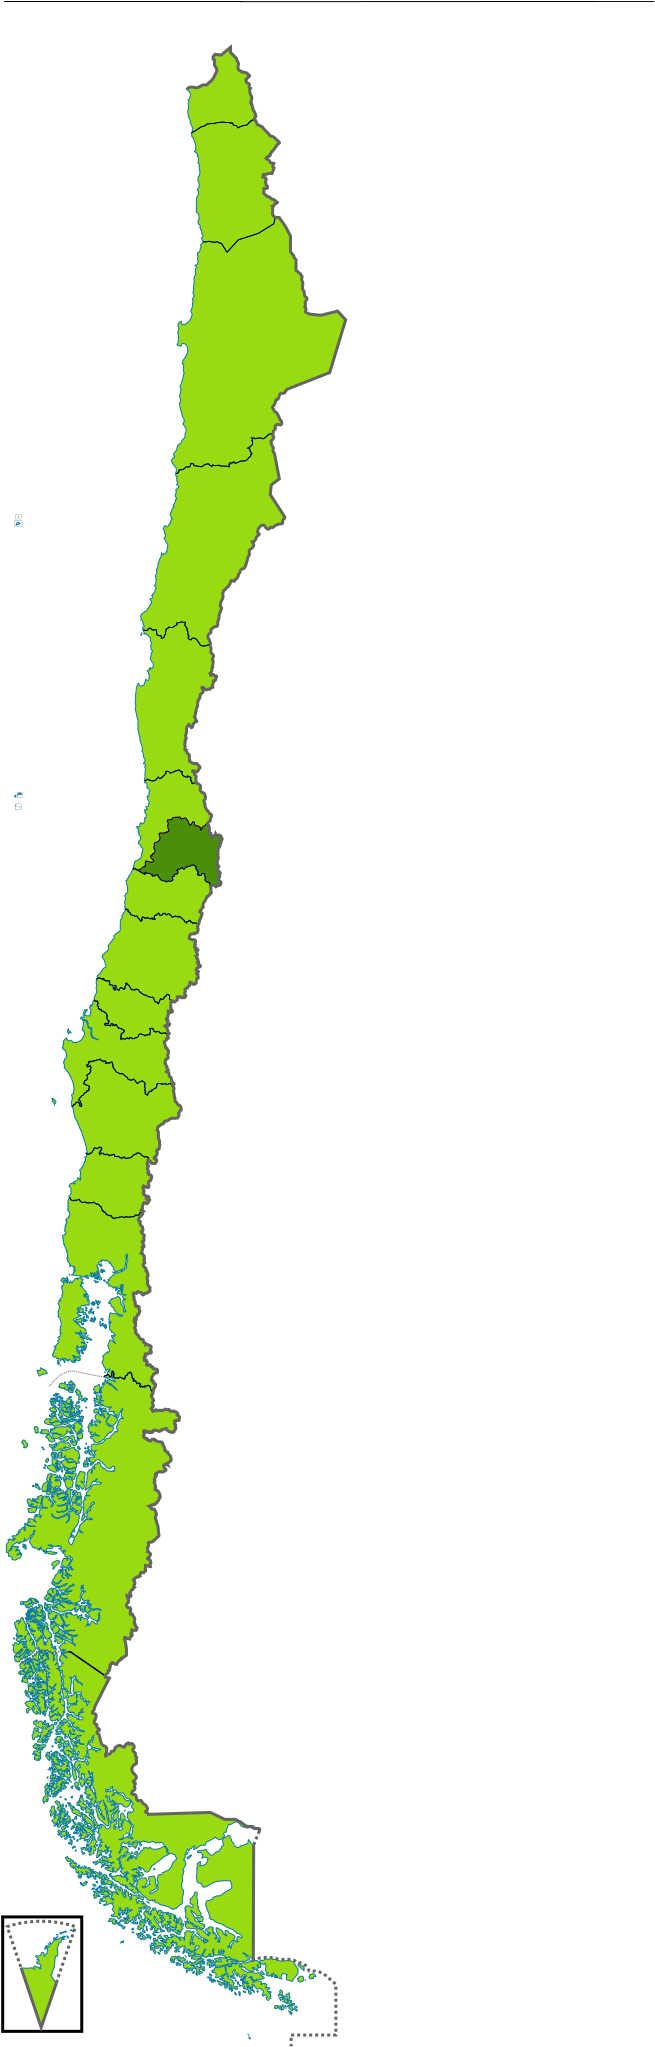 A Map Of Chile With Different Colored Regions